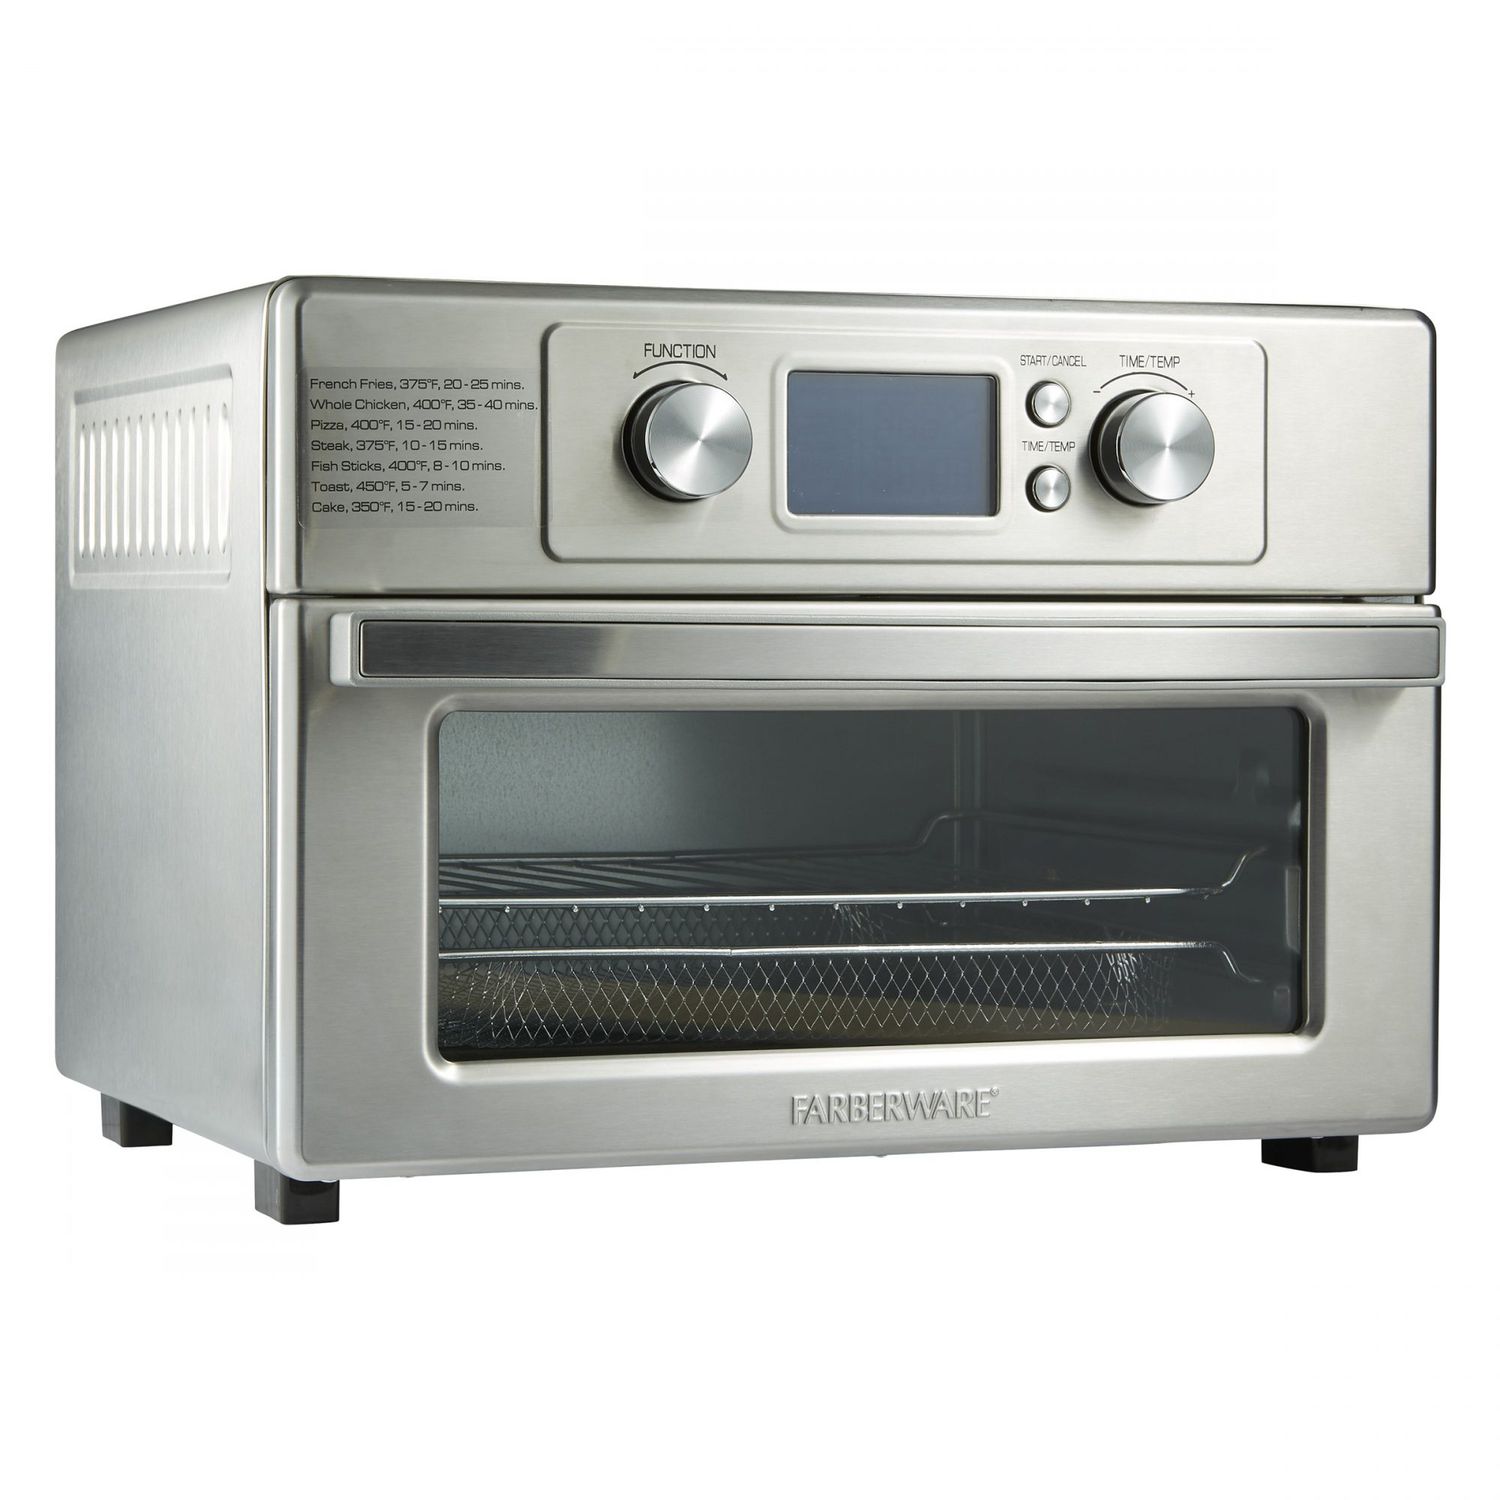 7 Best Toaster Ovens To Buy For Under 100 According To Customers